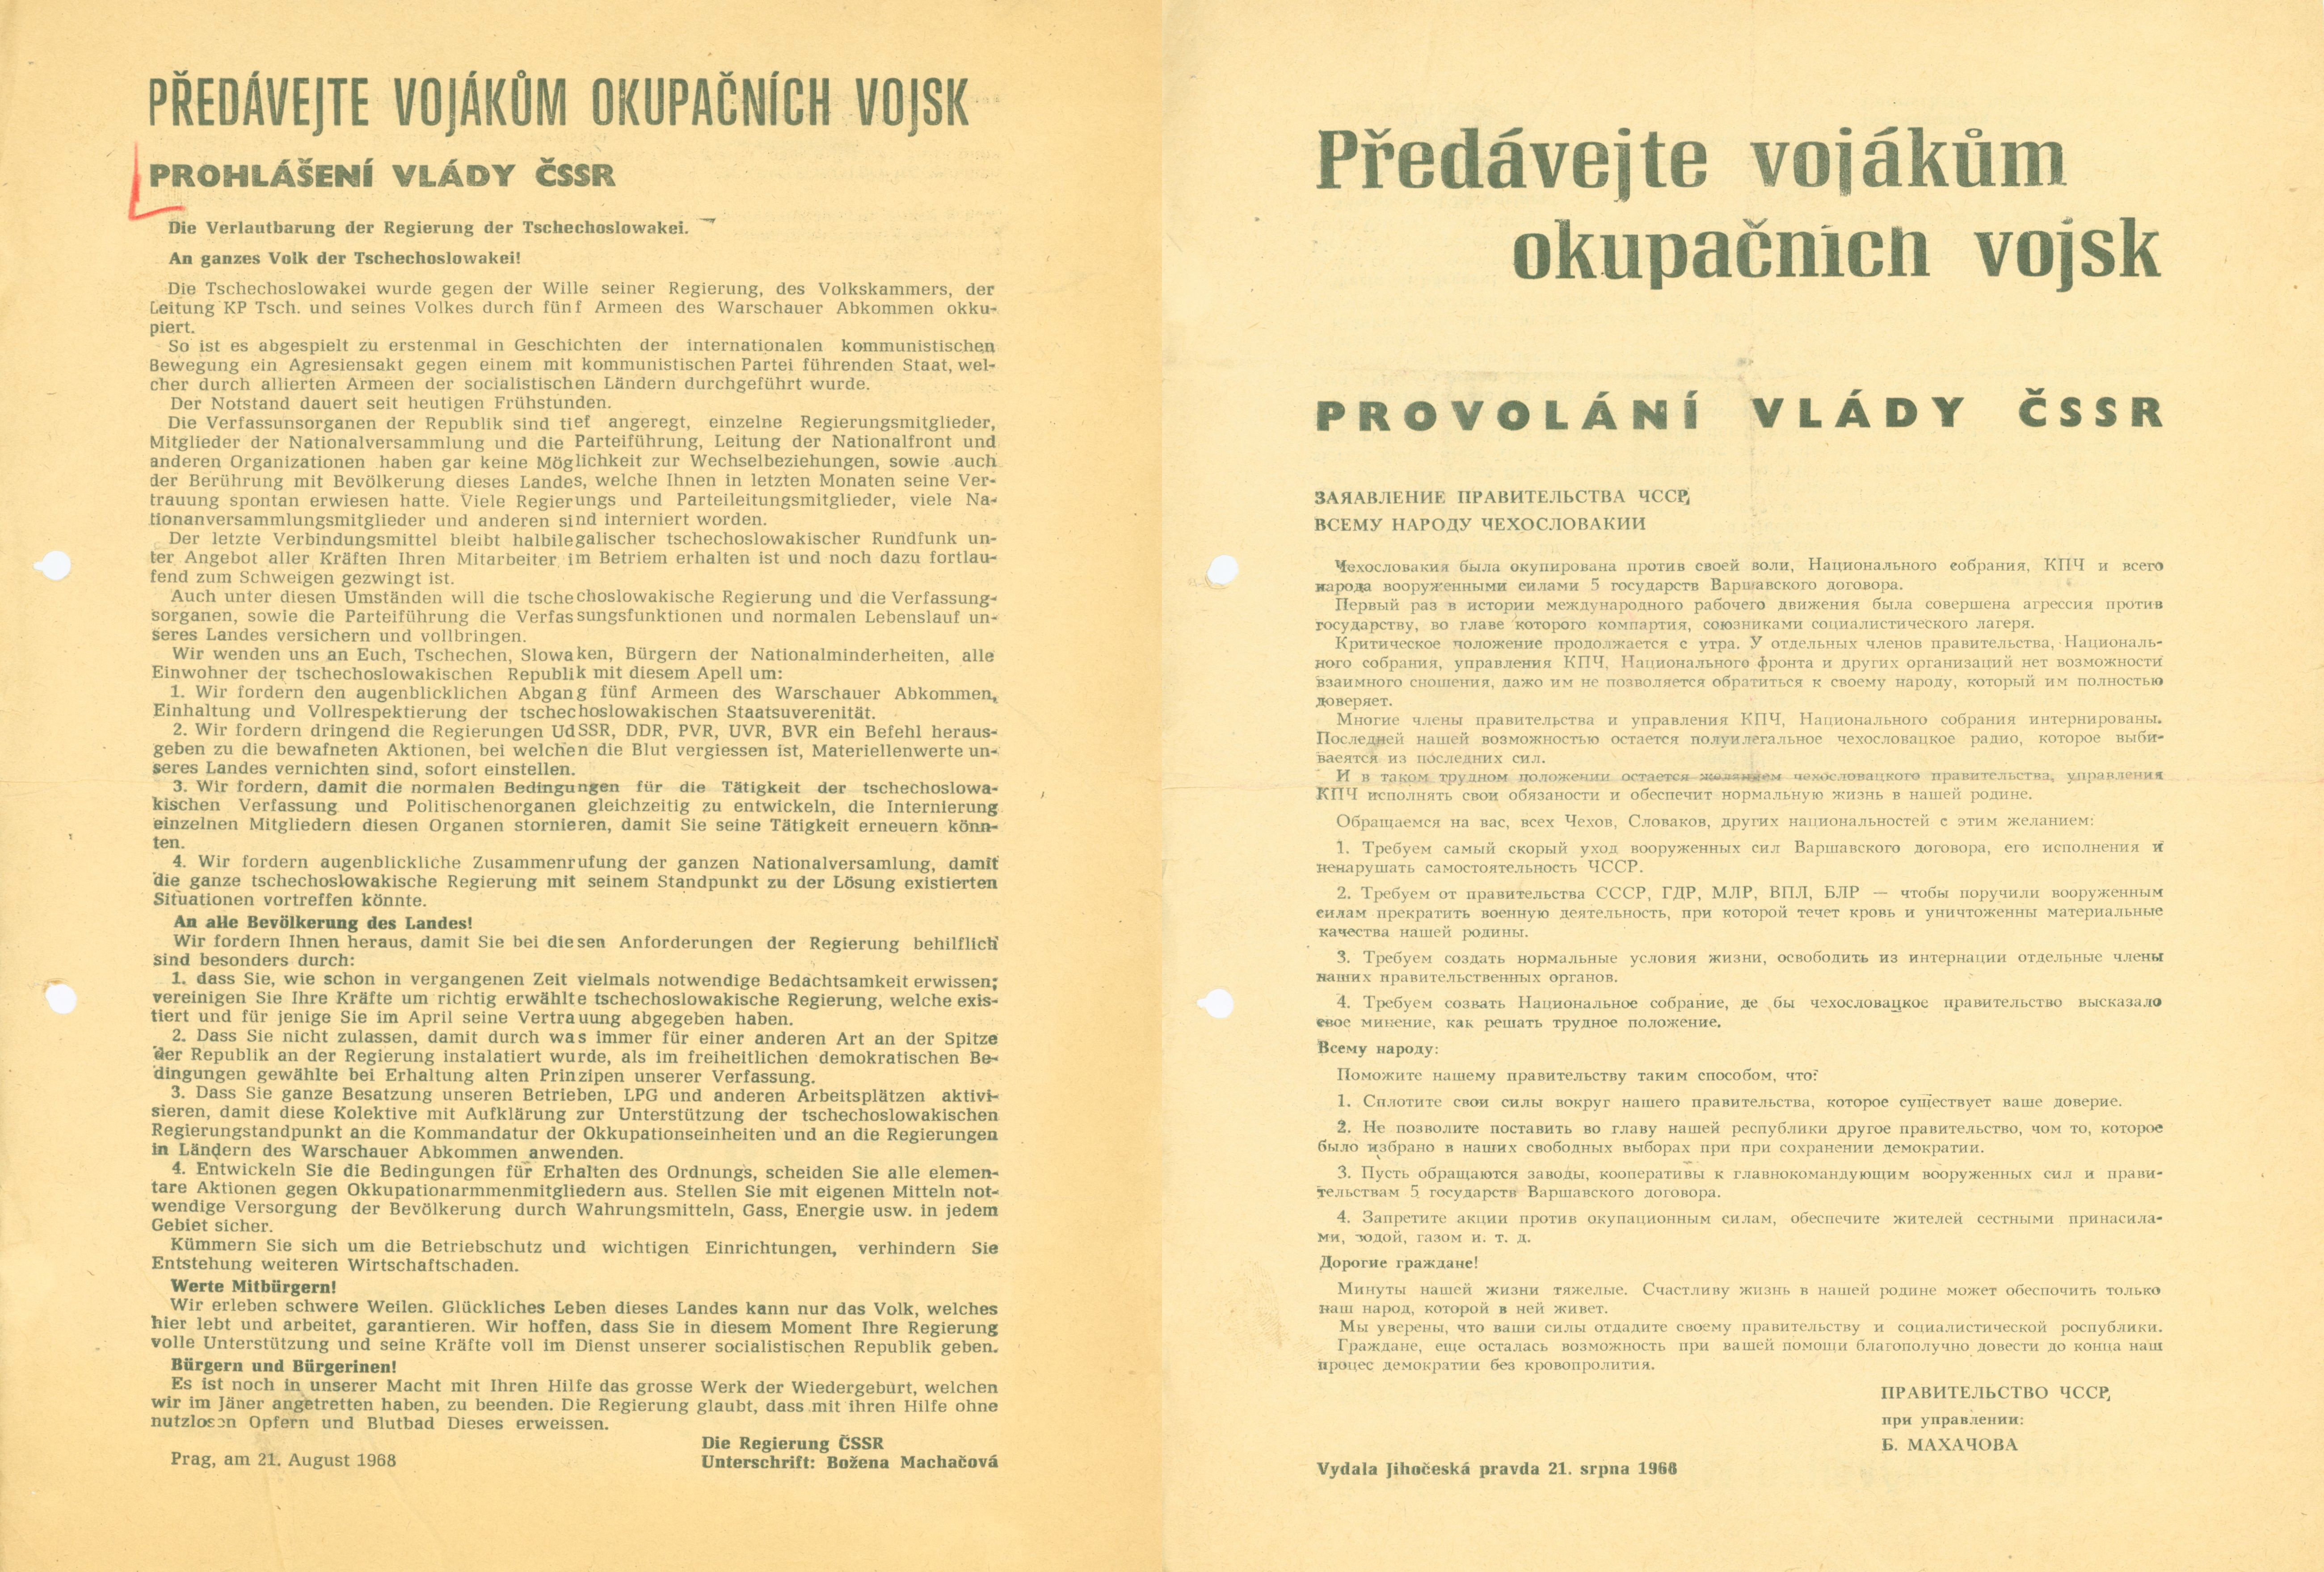 Statement of the Government of the CSSR to the People of Czechoslovakia